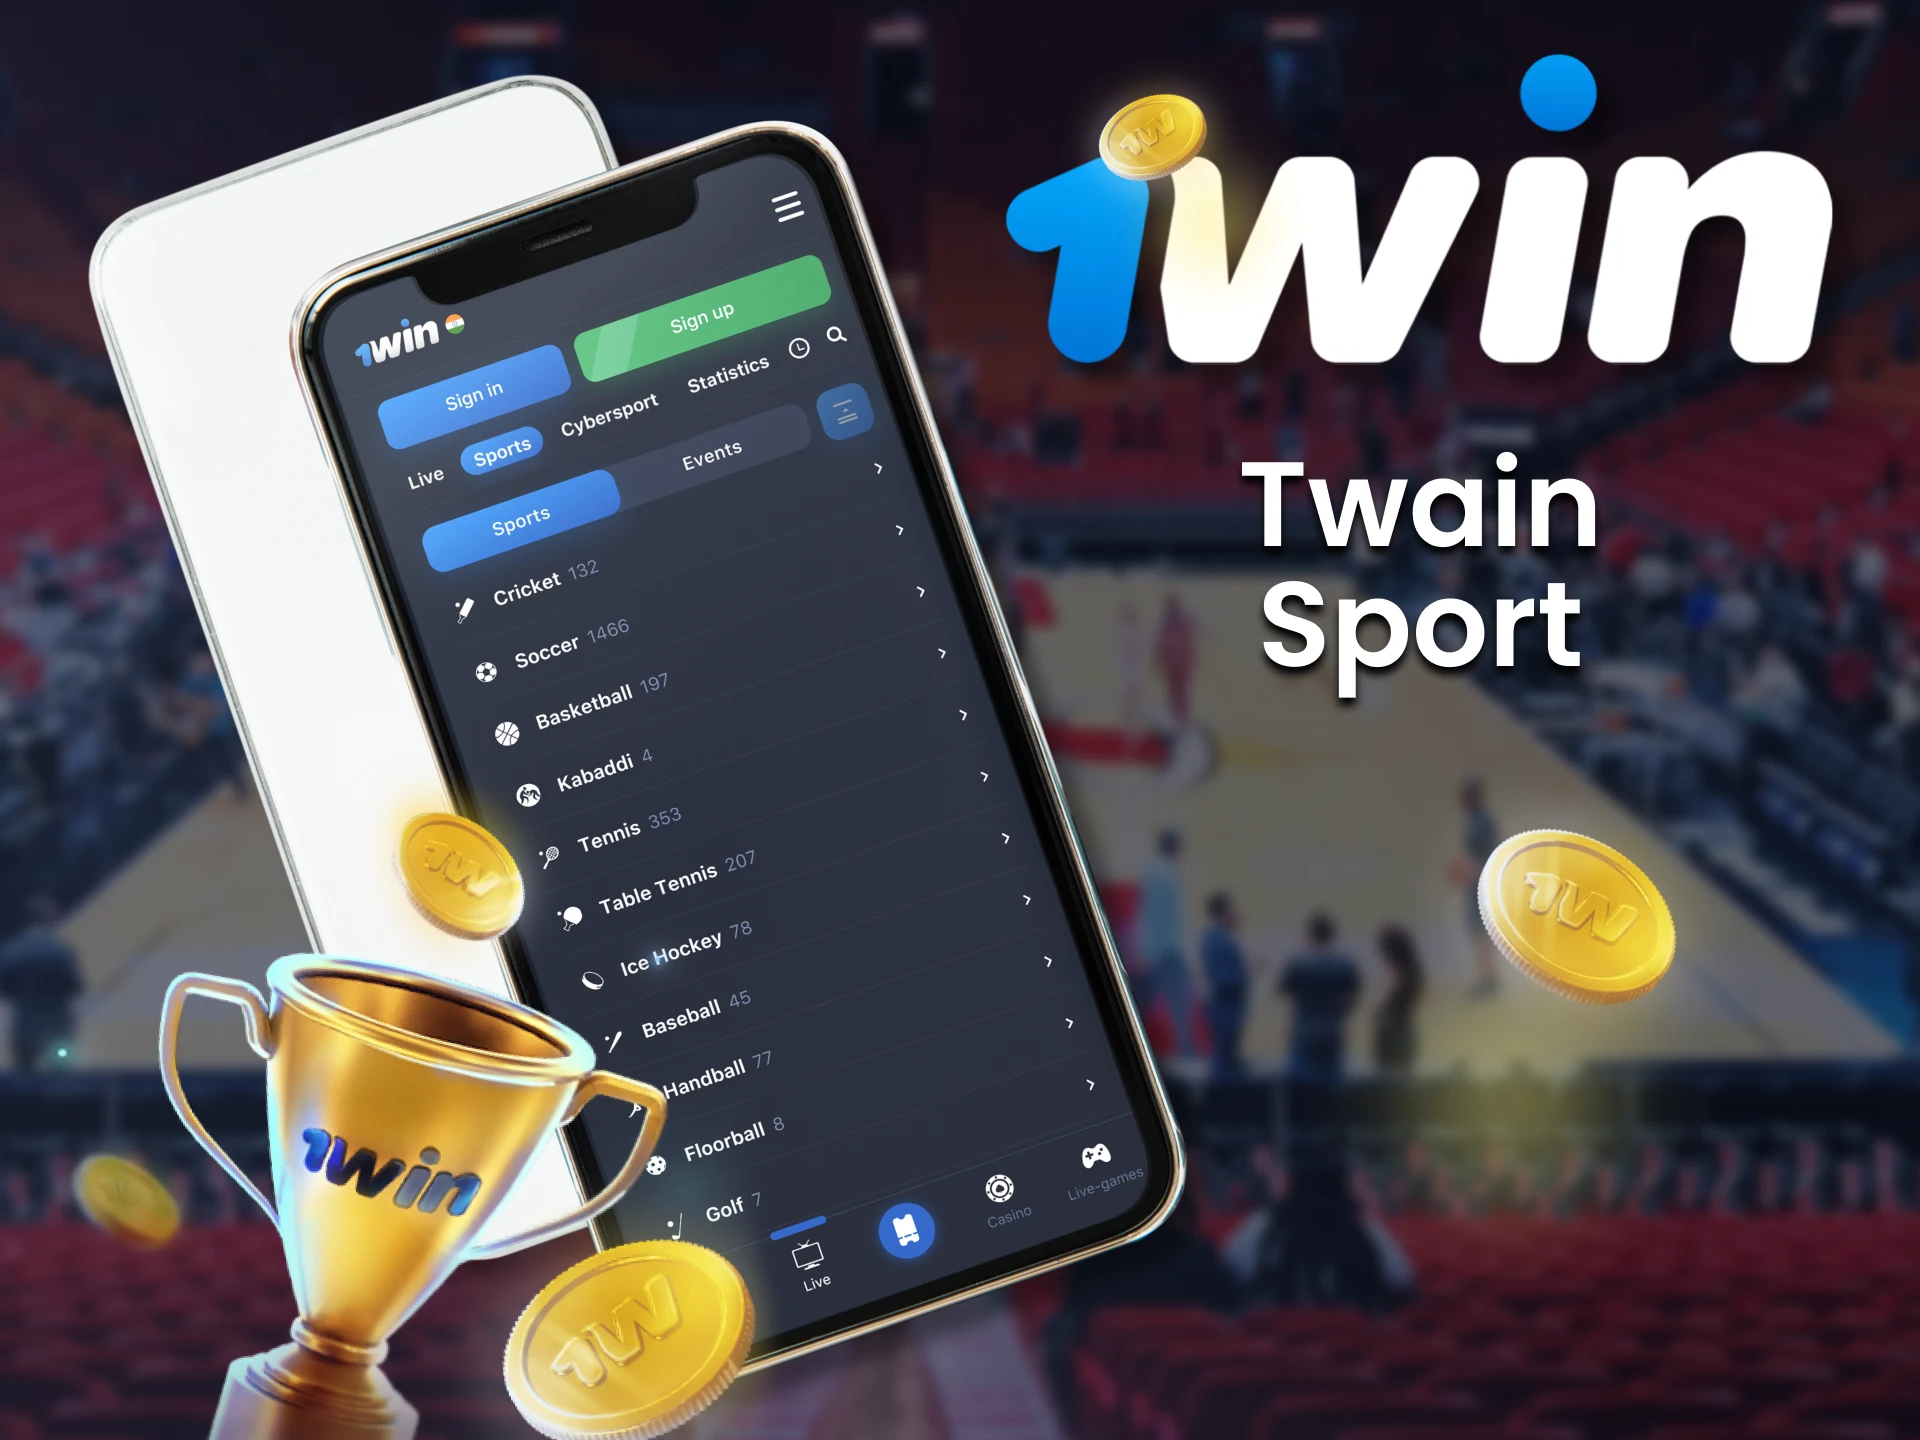 At 1Win, bet on Twain Sport right from your mobile phone.